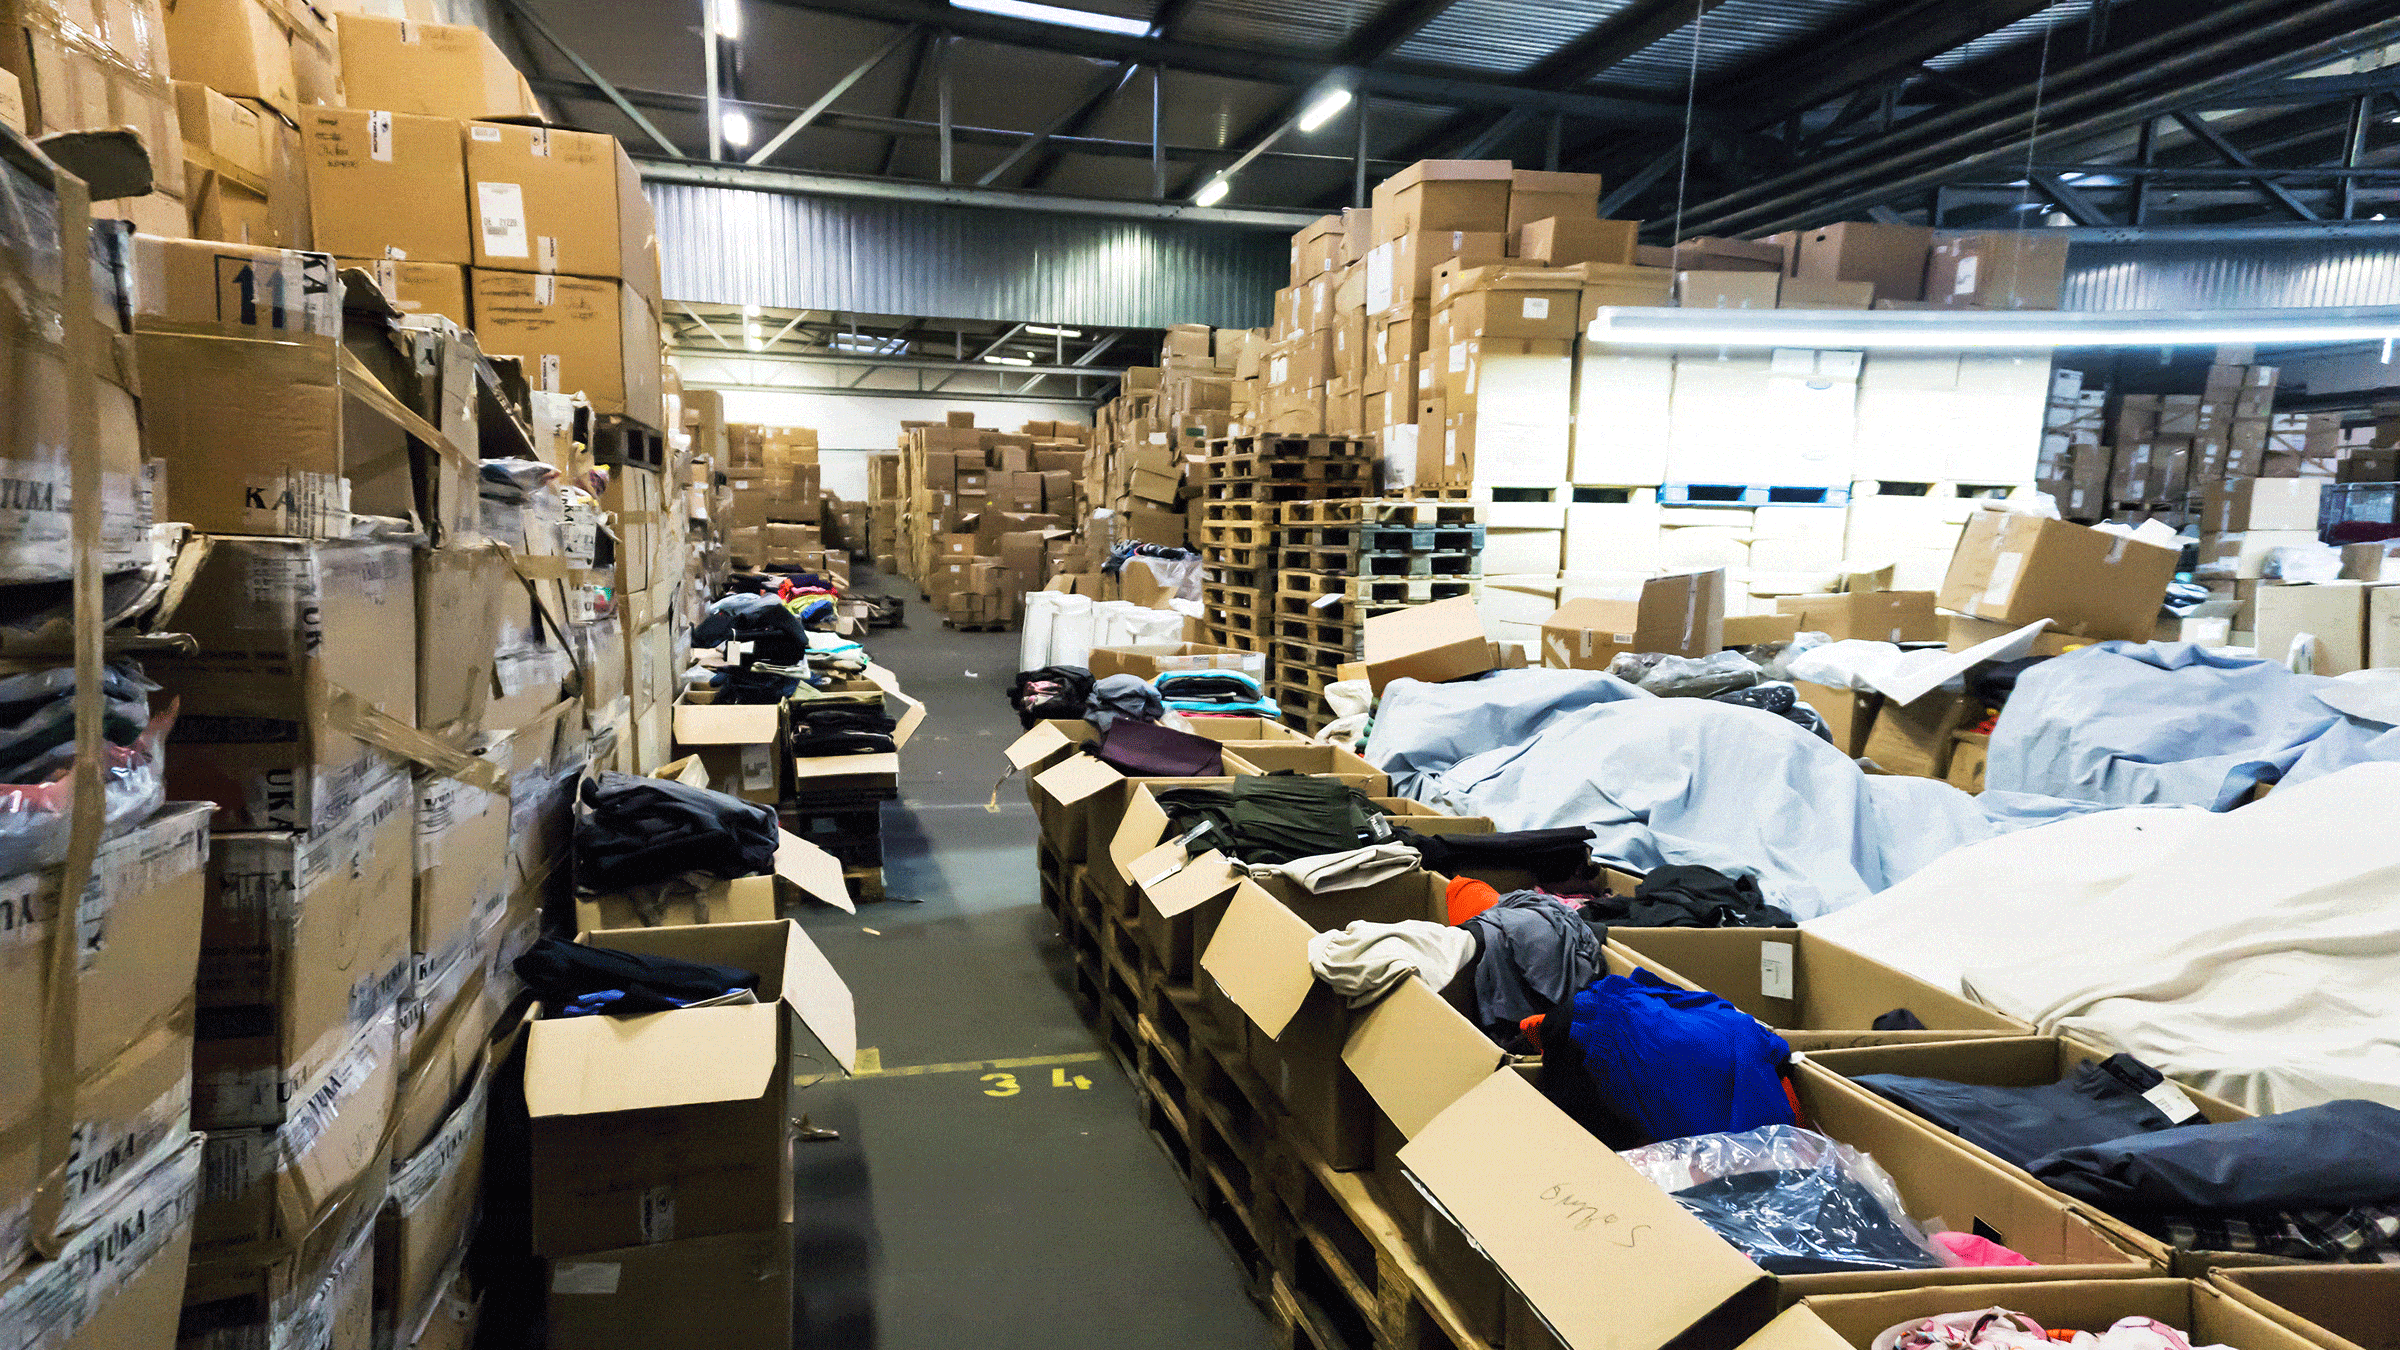 A warehouse containing boxes of clothes on shelves and on the floor